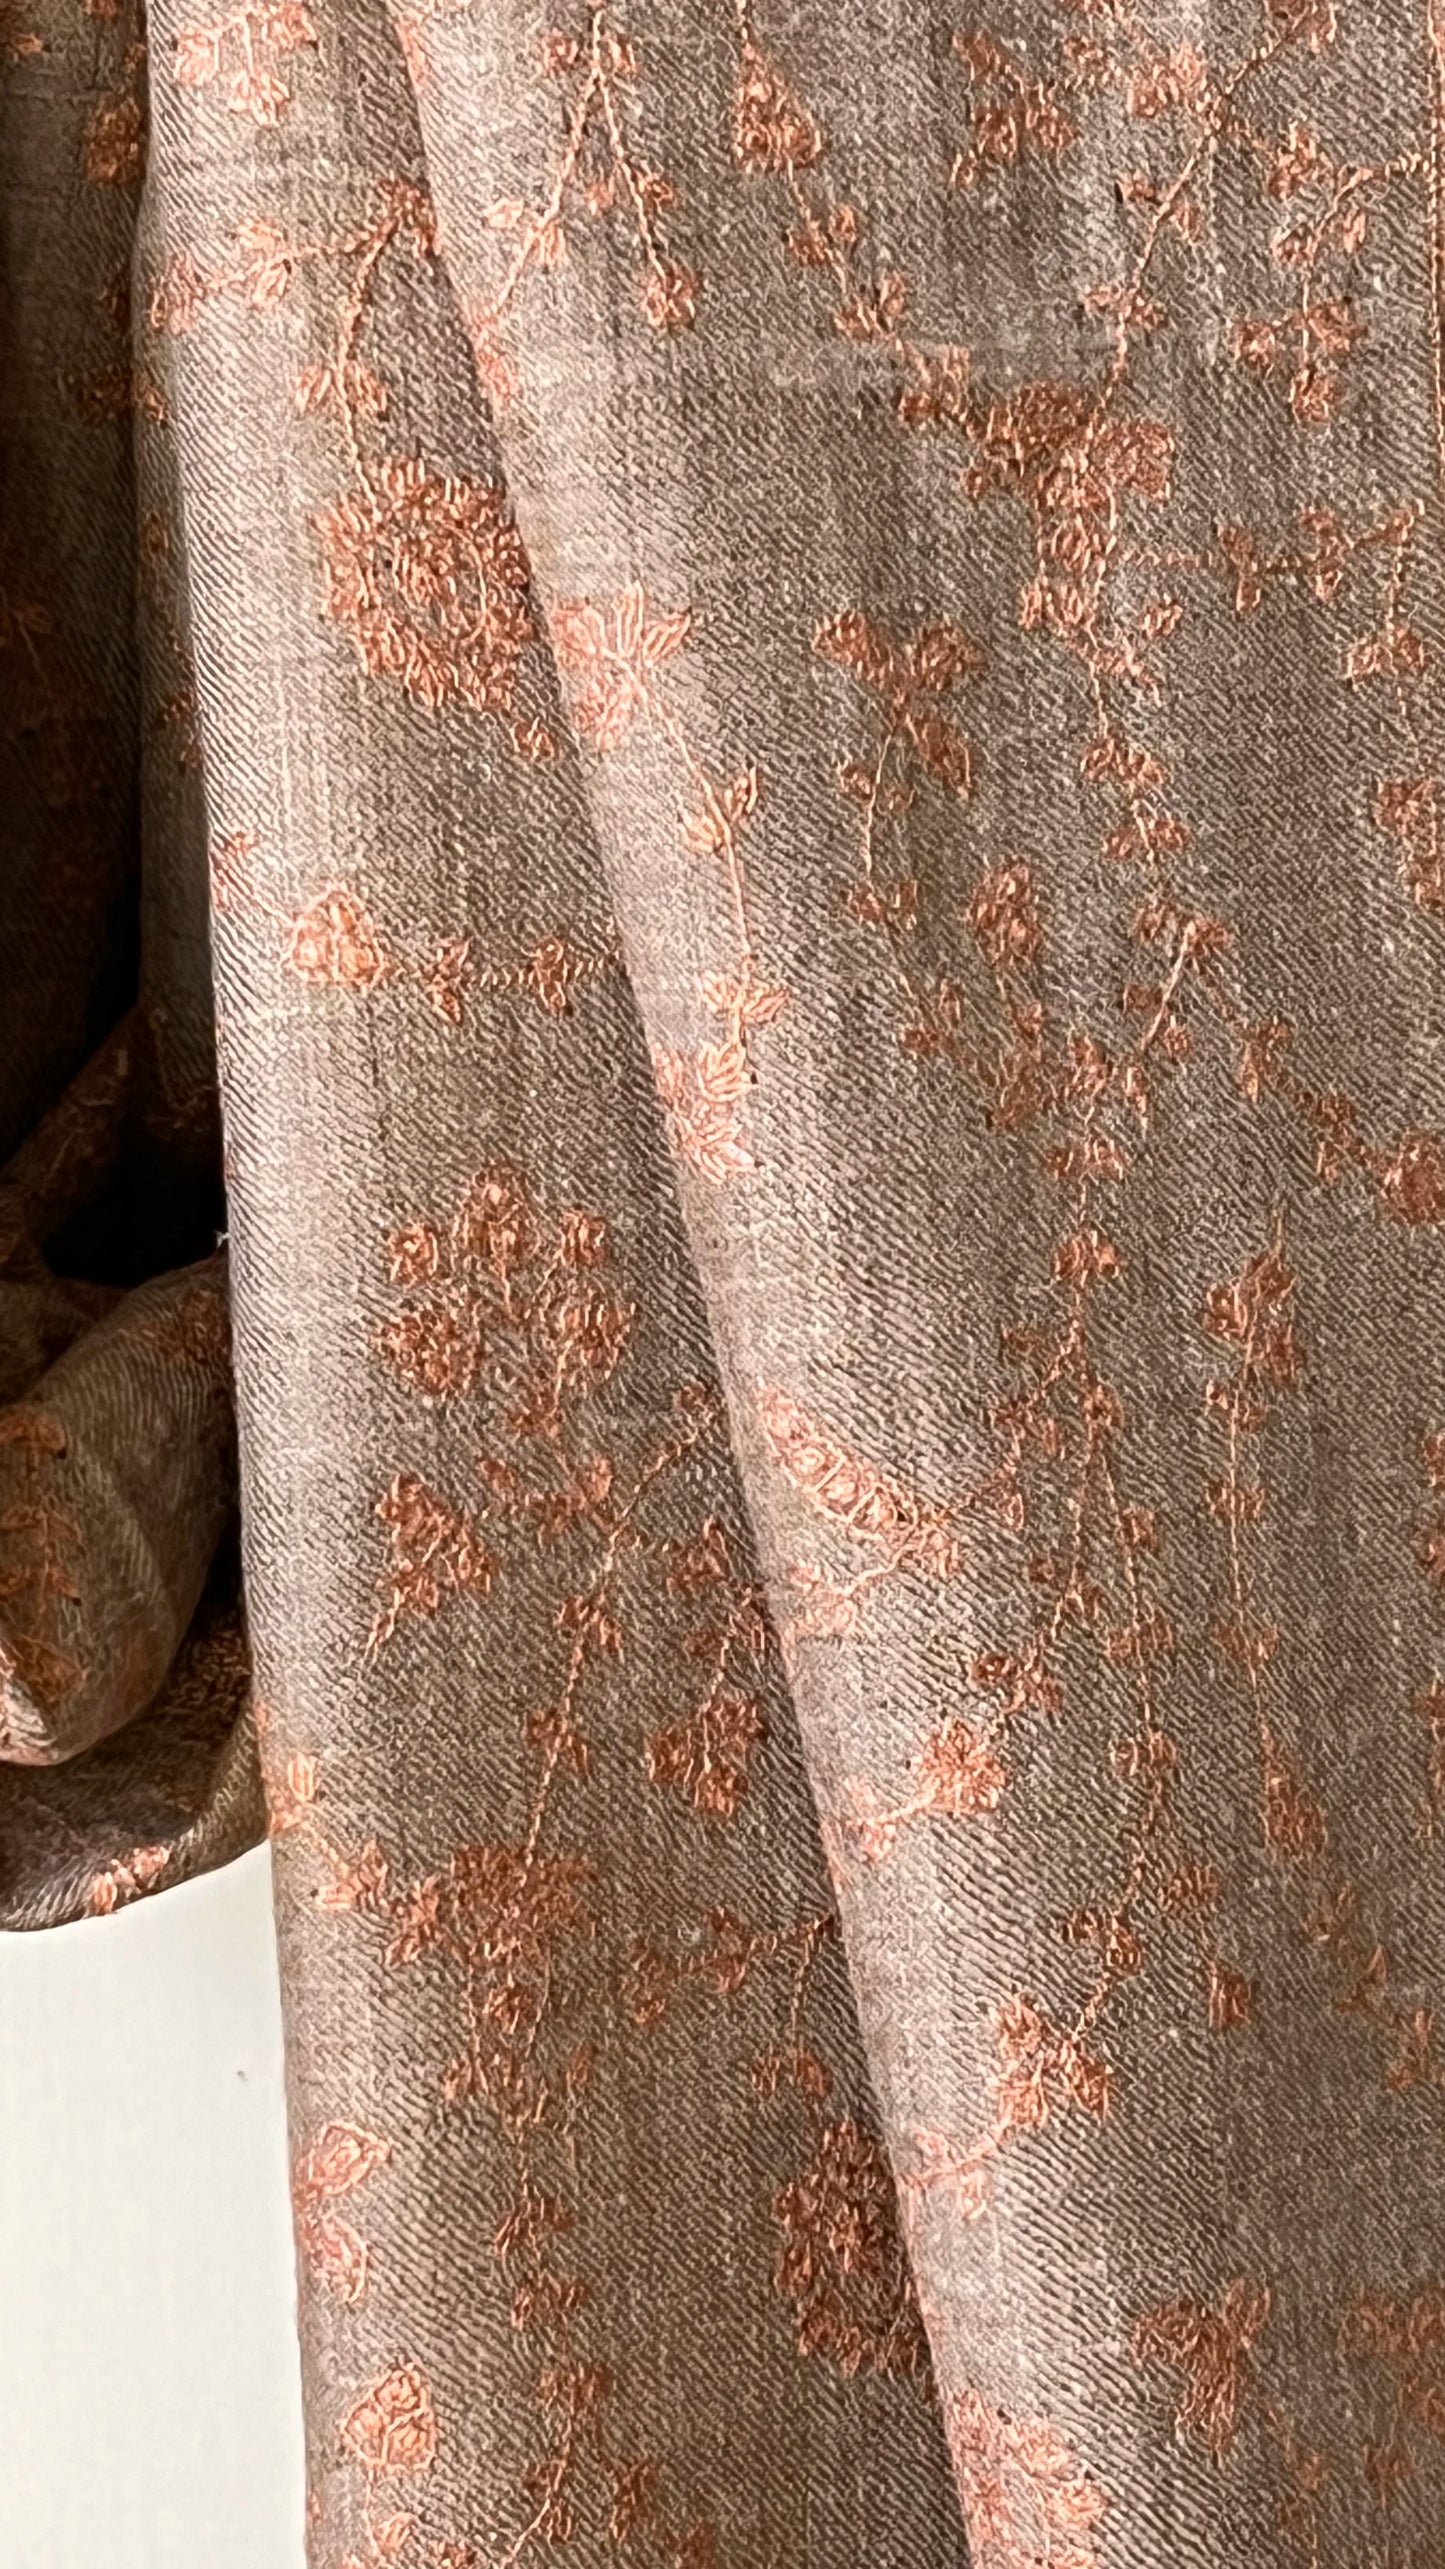 Pashmina Stole with Jaalidar Embroidery. The stole measures 74x202 cm, offering ample elegance and versatile styling options. Its natural taupe base is adorned with exquisite rose gold Jaalidar embroidery, showcasing the refined and intricate artistry that Kashmir is renowned for. 